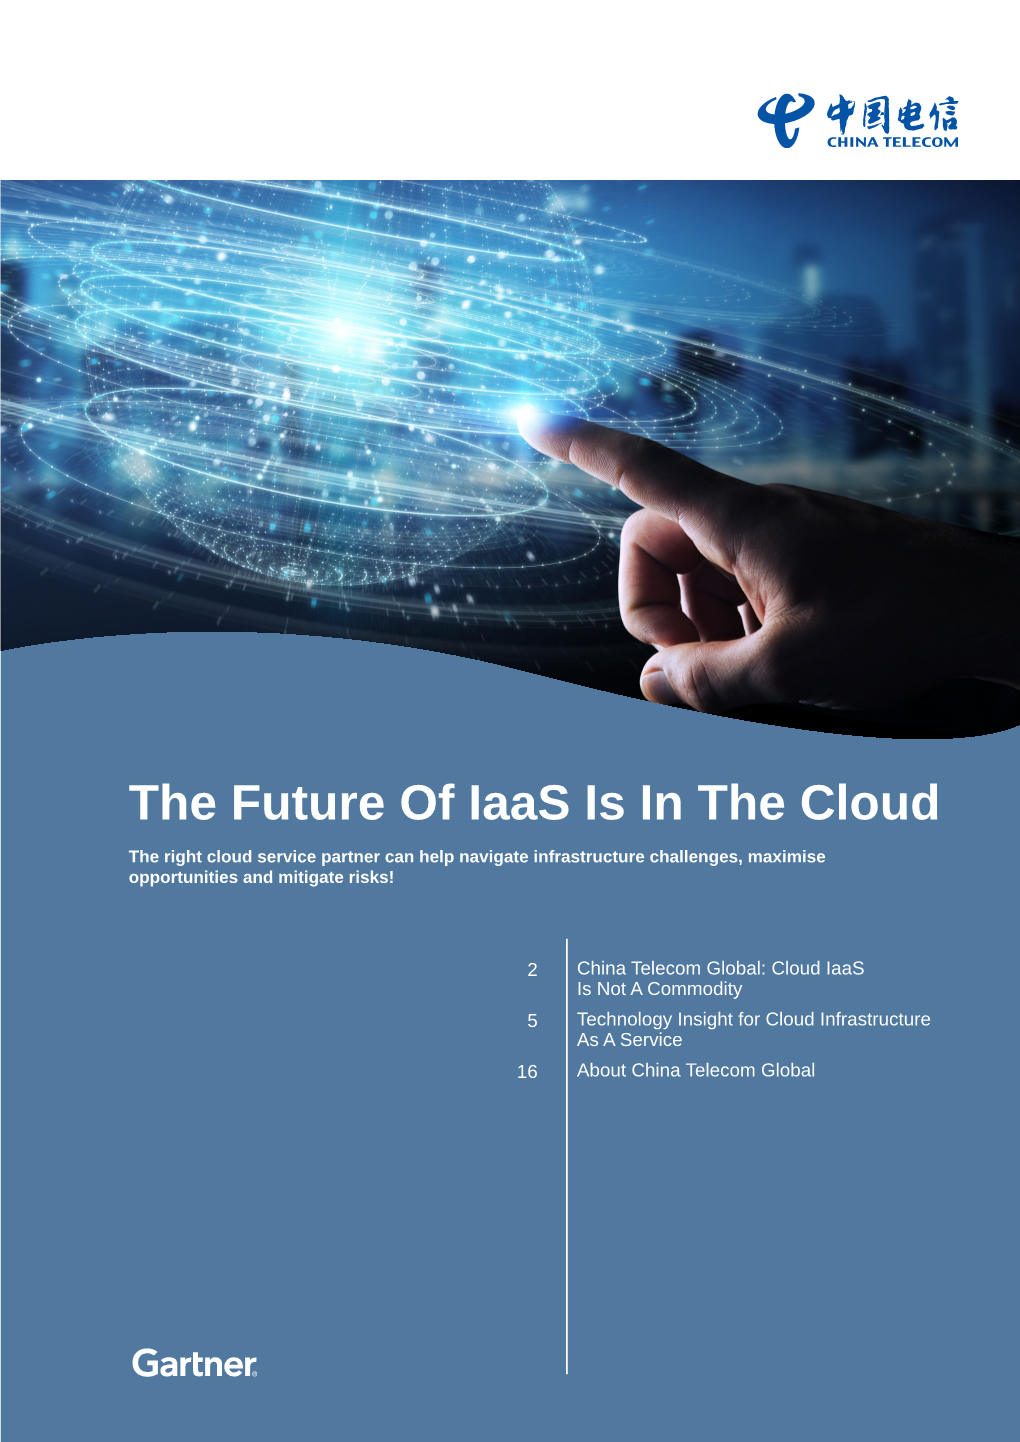 The Future of Iaas Is in the Cloud the Right Cloud Service Partner Can Help Navigate Infrastructure Challenges, Maximise Opportunities and Mitigate Risks!